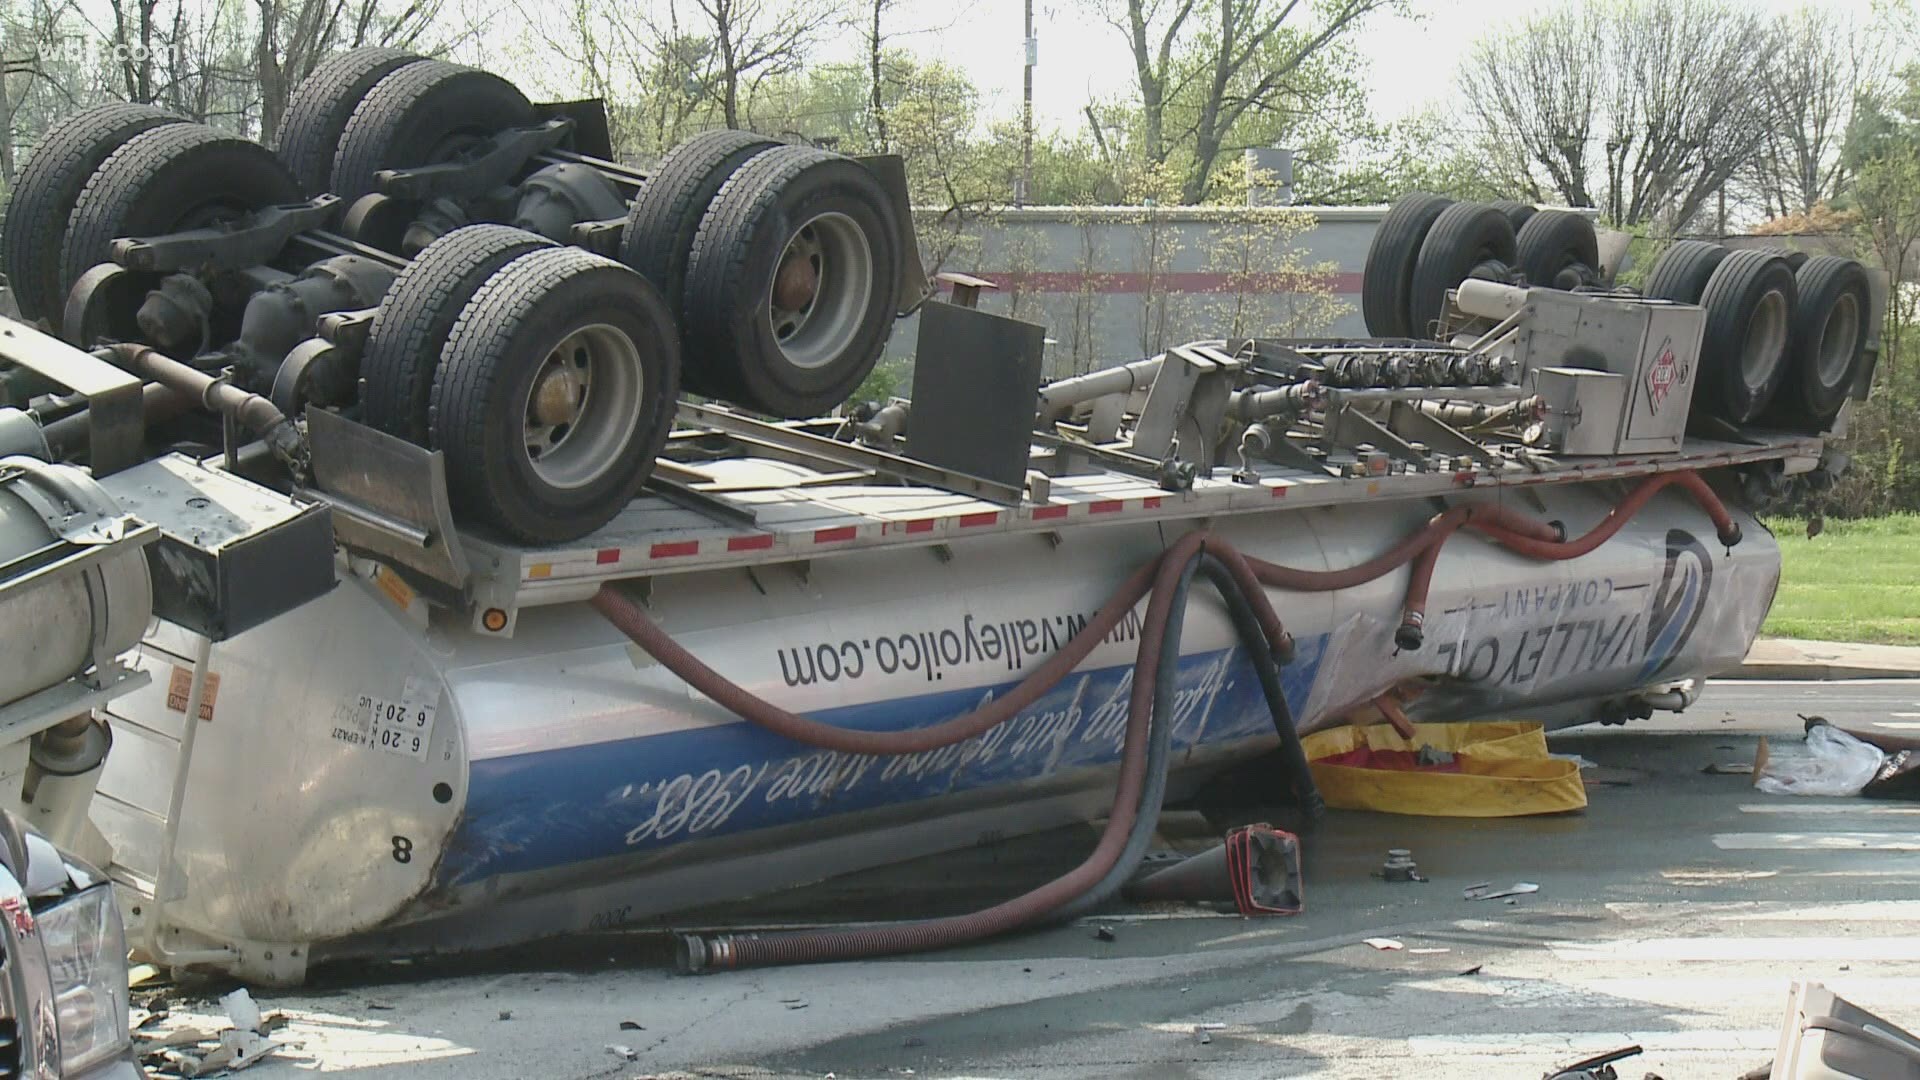 Two people were injured when a diesel tanker truck overturned in West Knoxville.